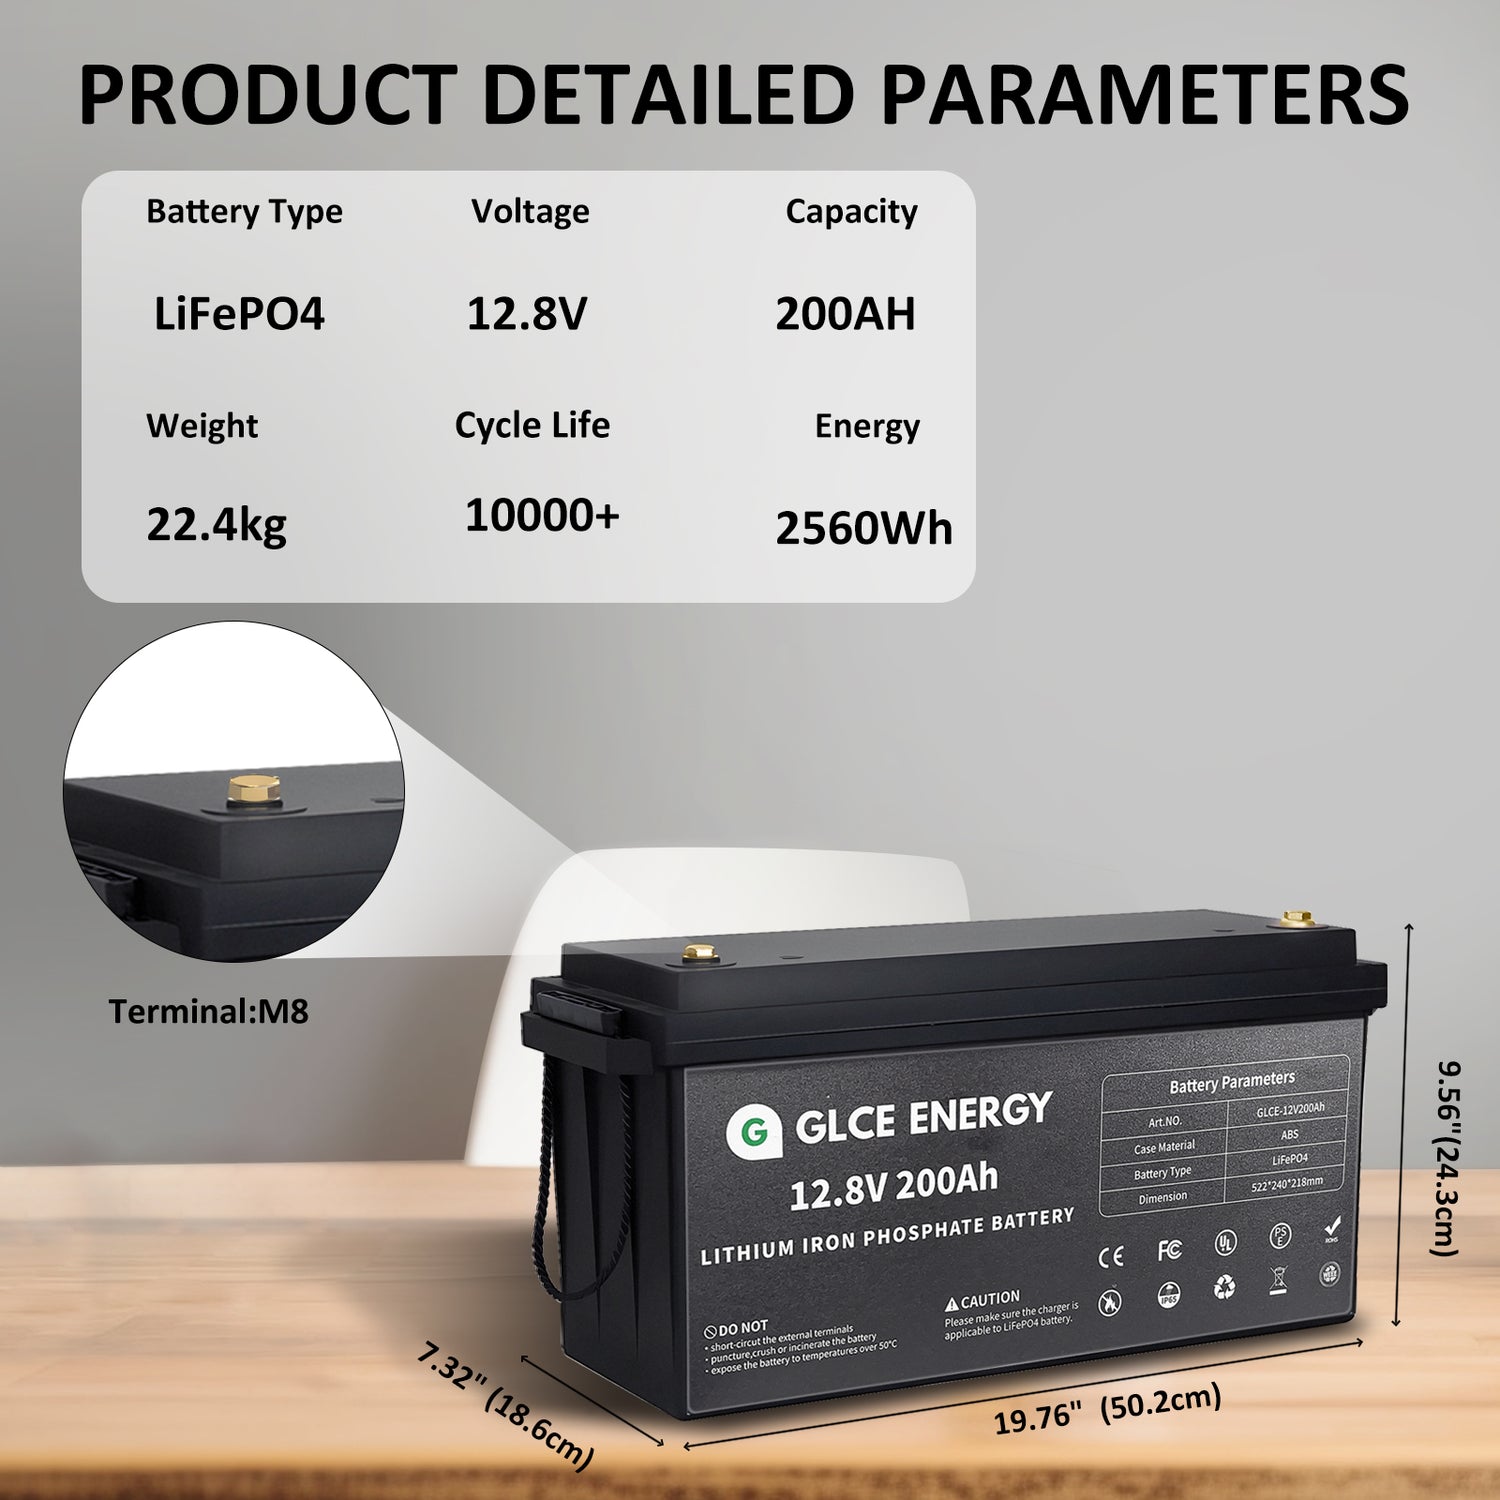 GLCE ENERGY LiFePO4 Battery Detailed